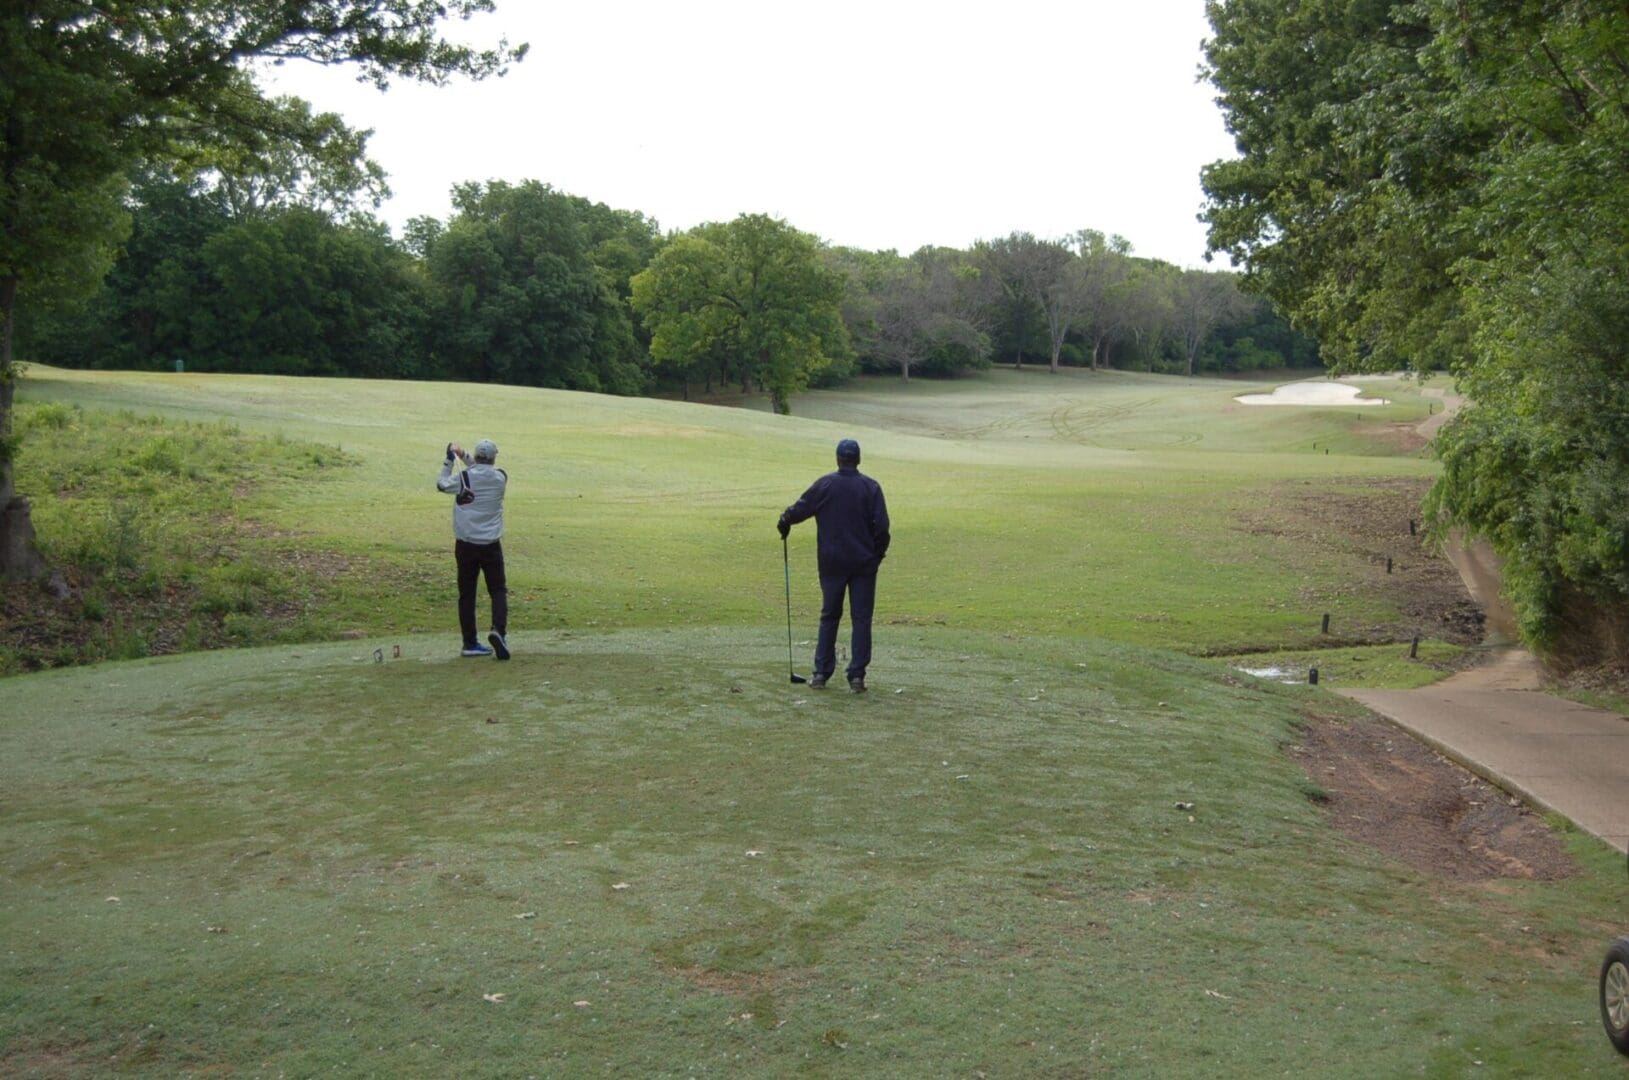 Two people playing golf on a golf course.